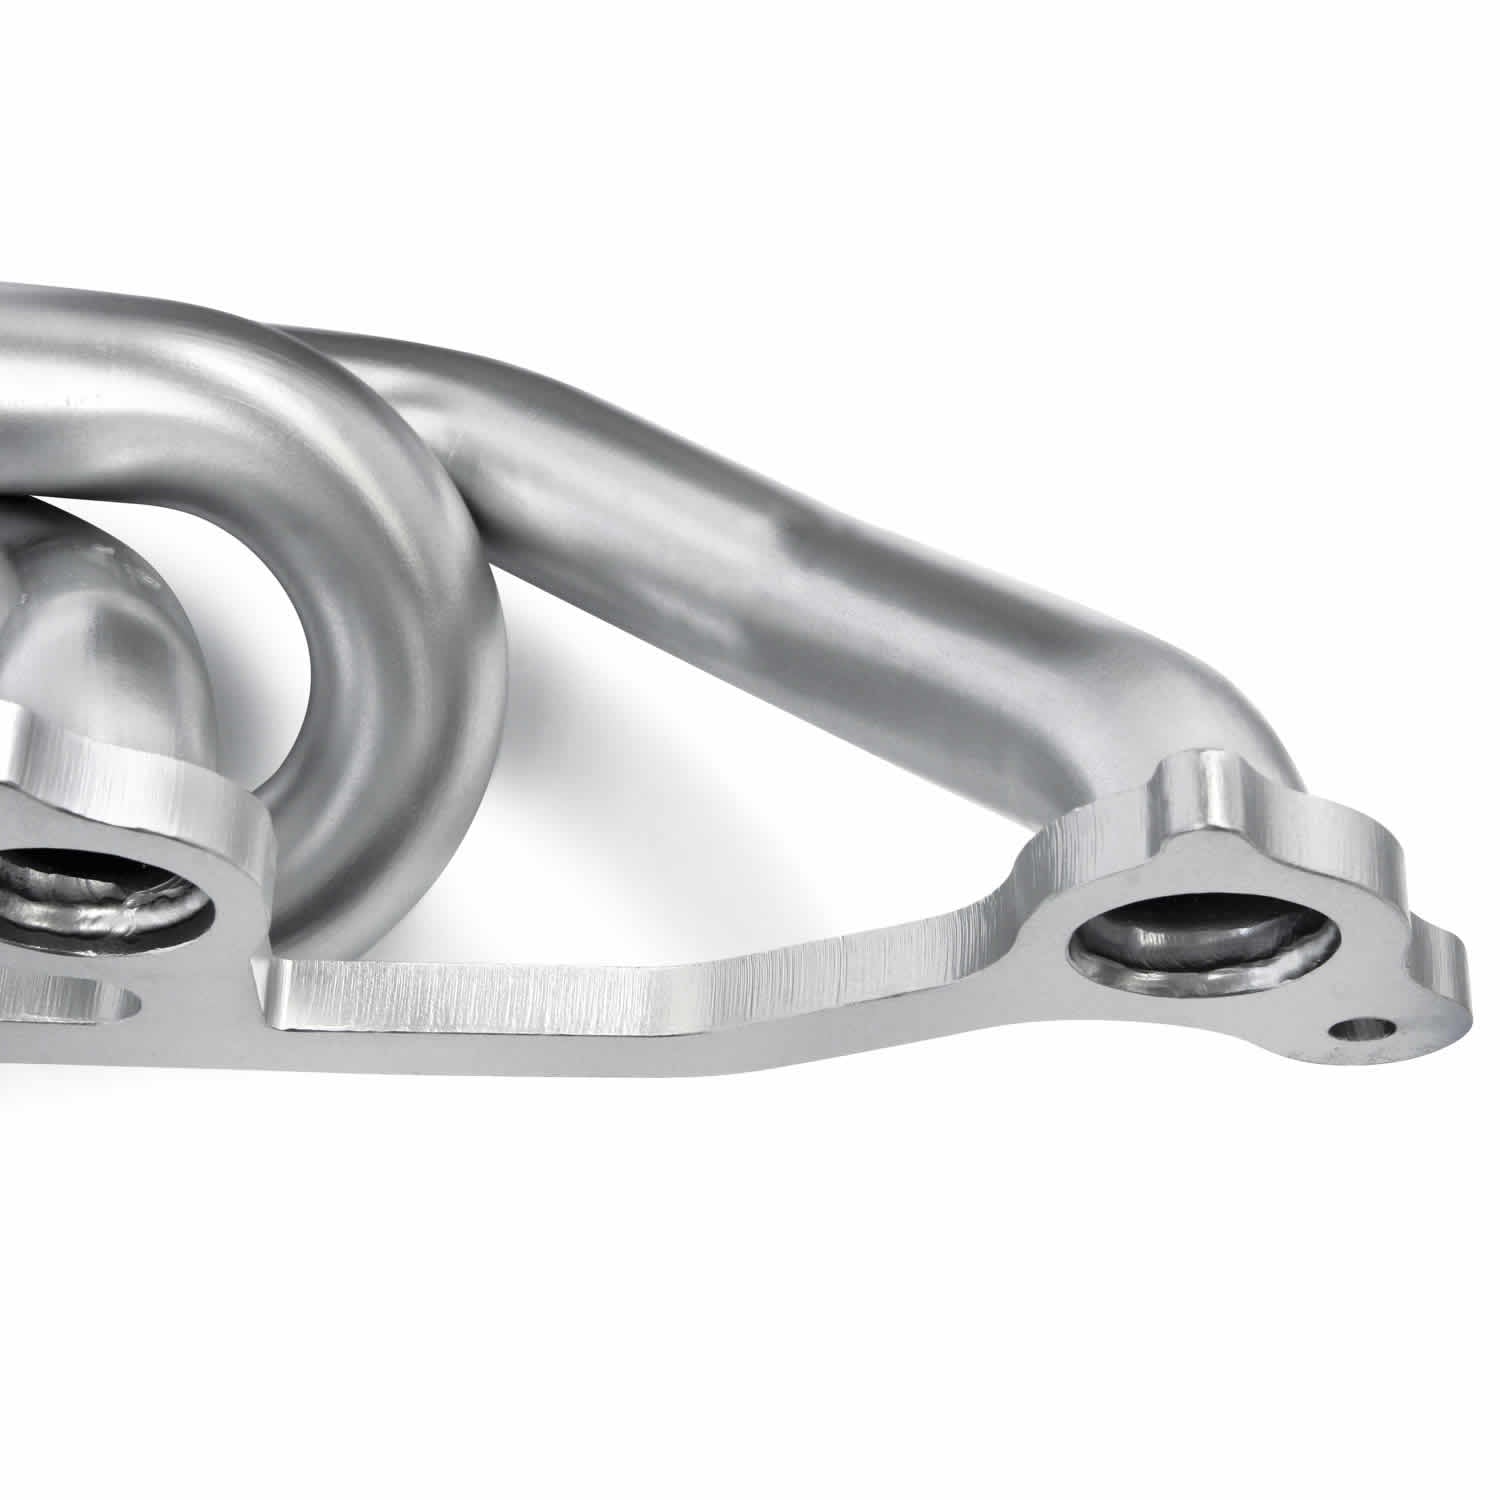 Exhaust Header System for 2000-2006 Jeep Wrangler , 2000-2001 Cherokee  and 1999-2001 Grand Cherokee [51306] – Banks